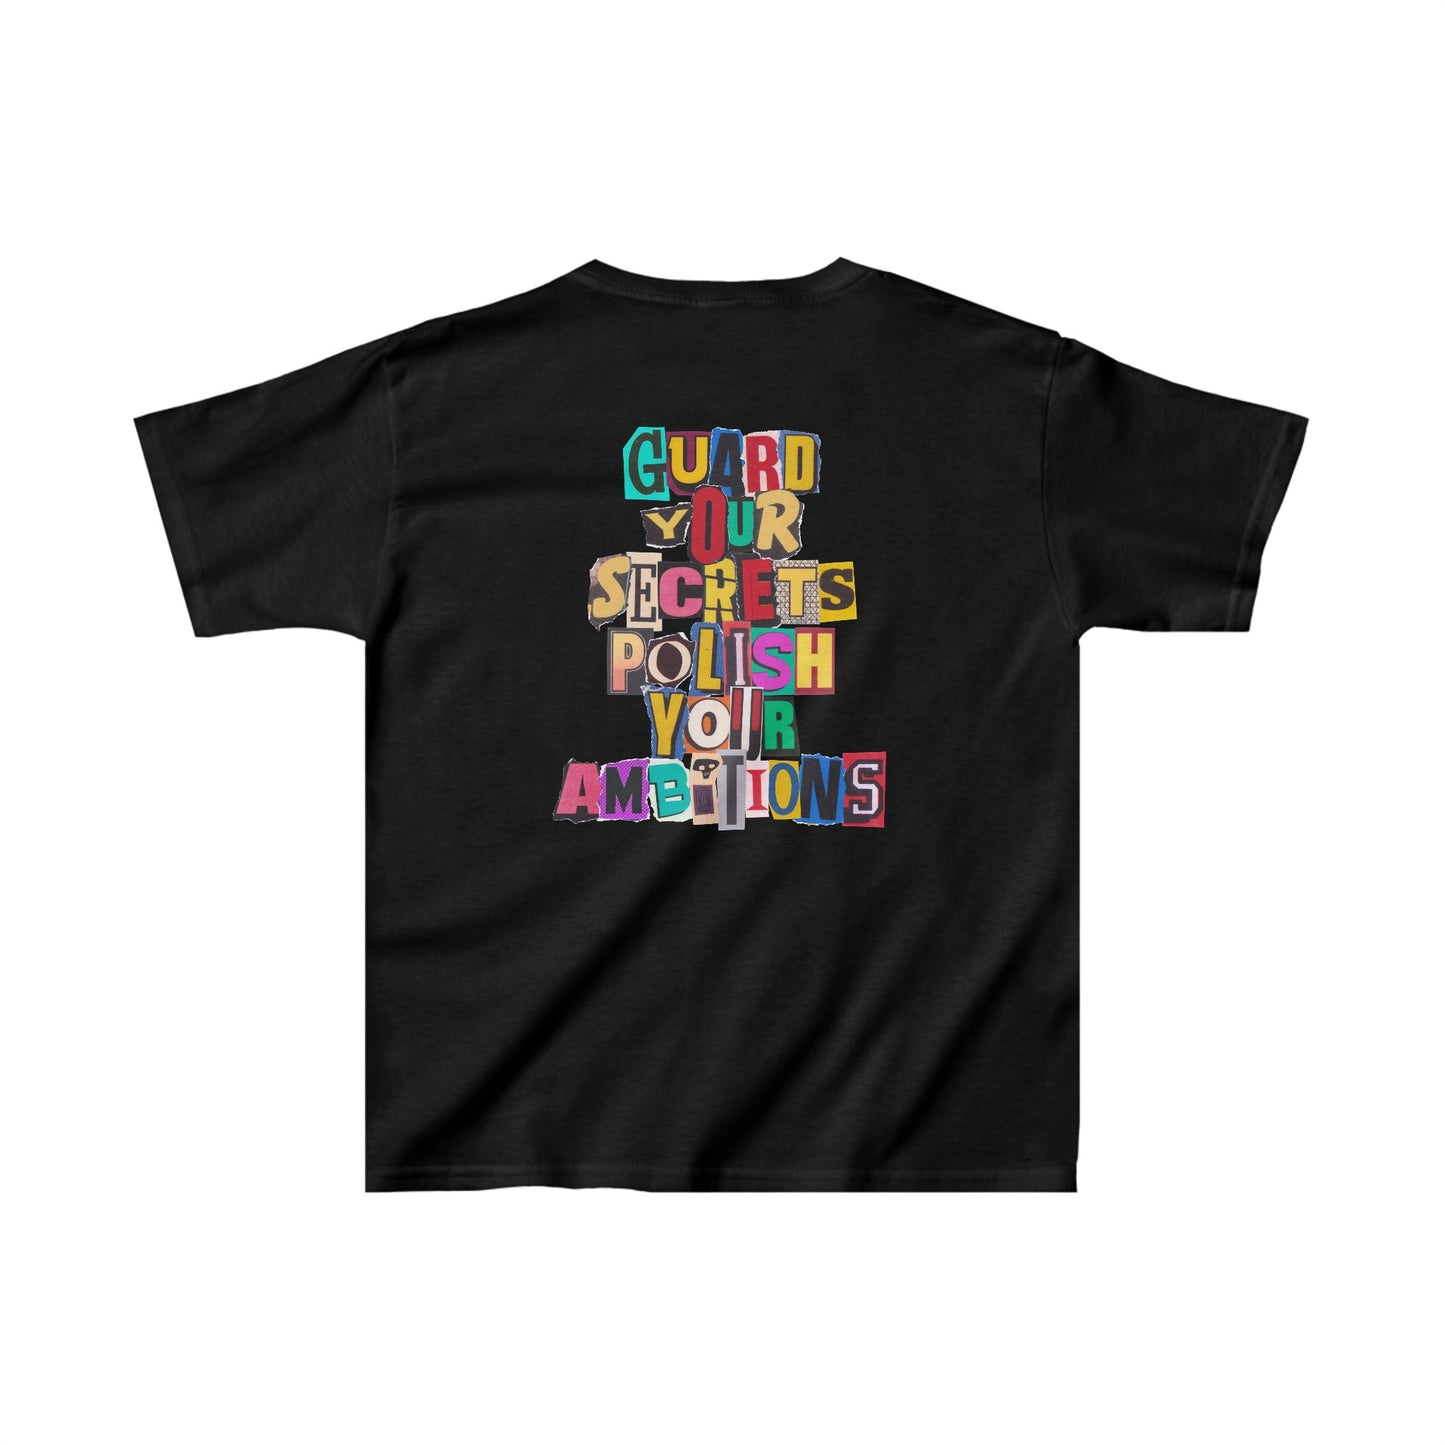 Youth WIY x KD Vintage T-Shirt